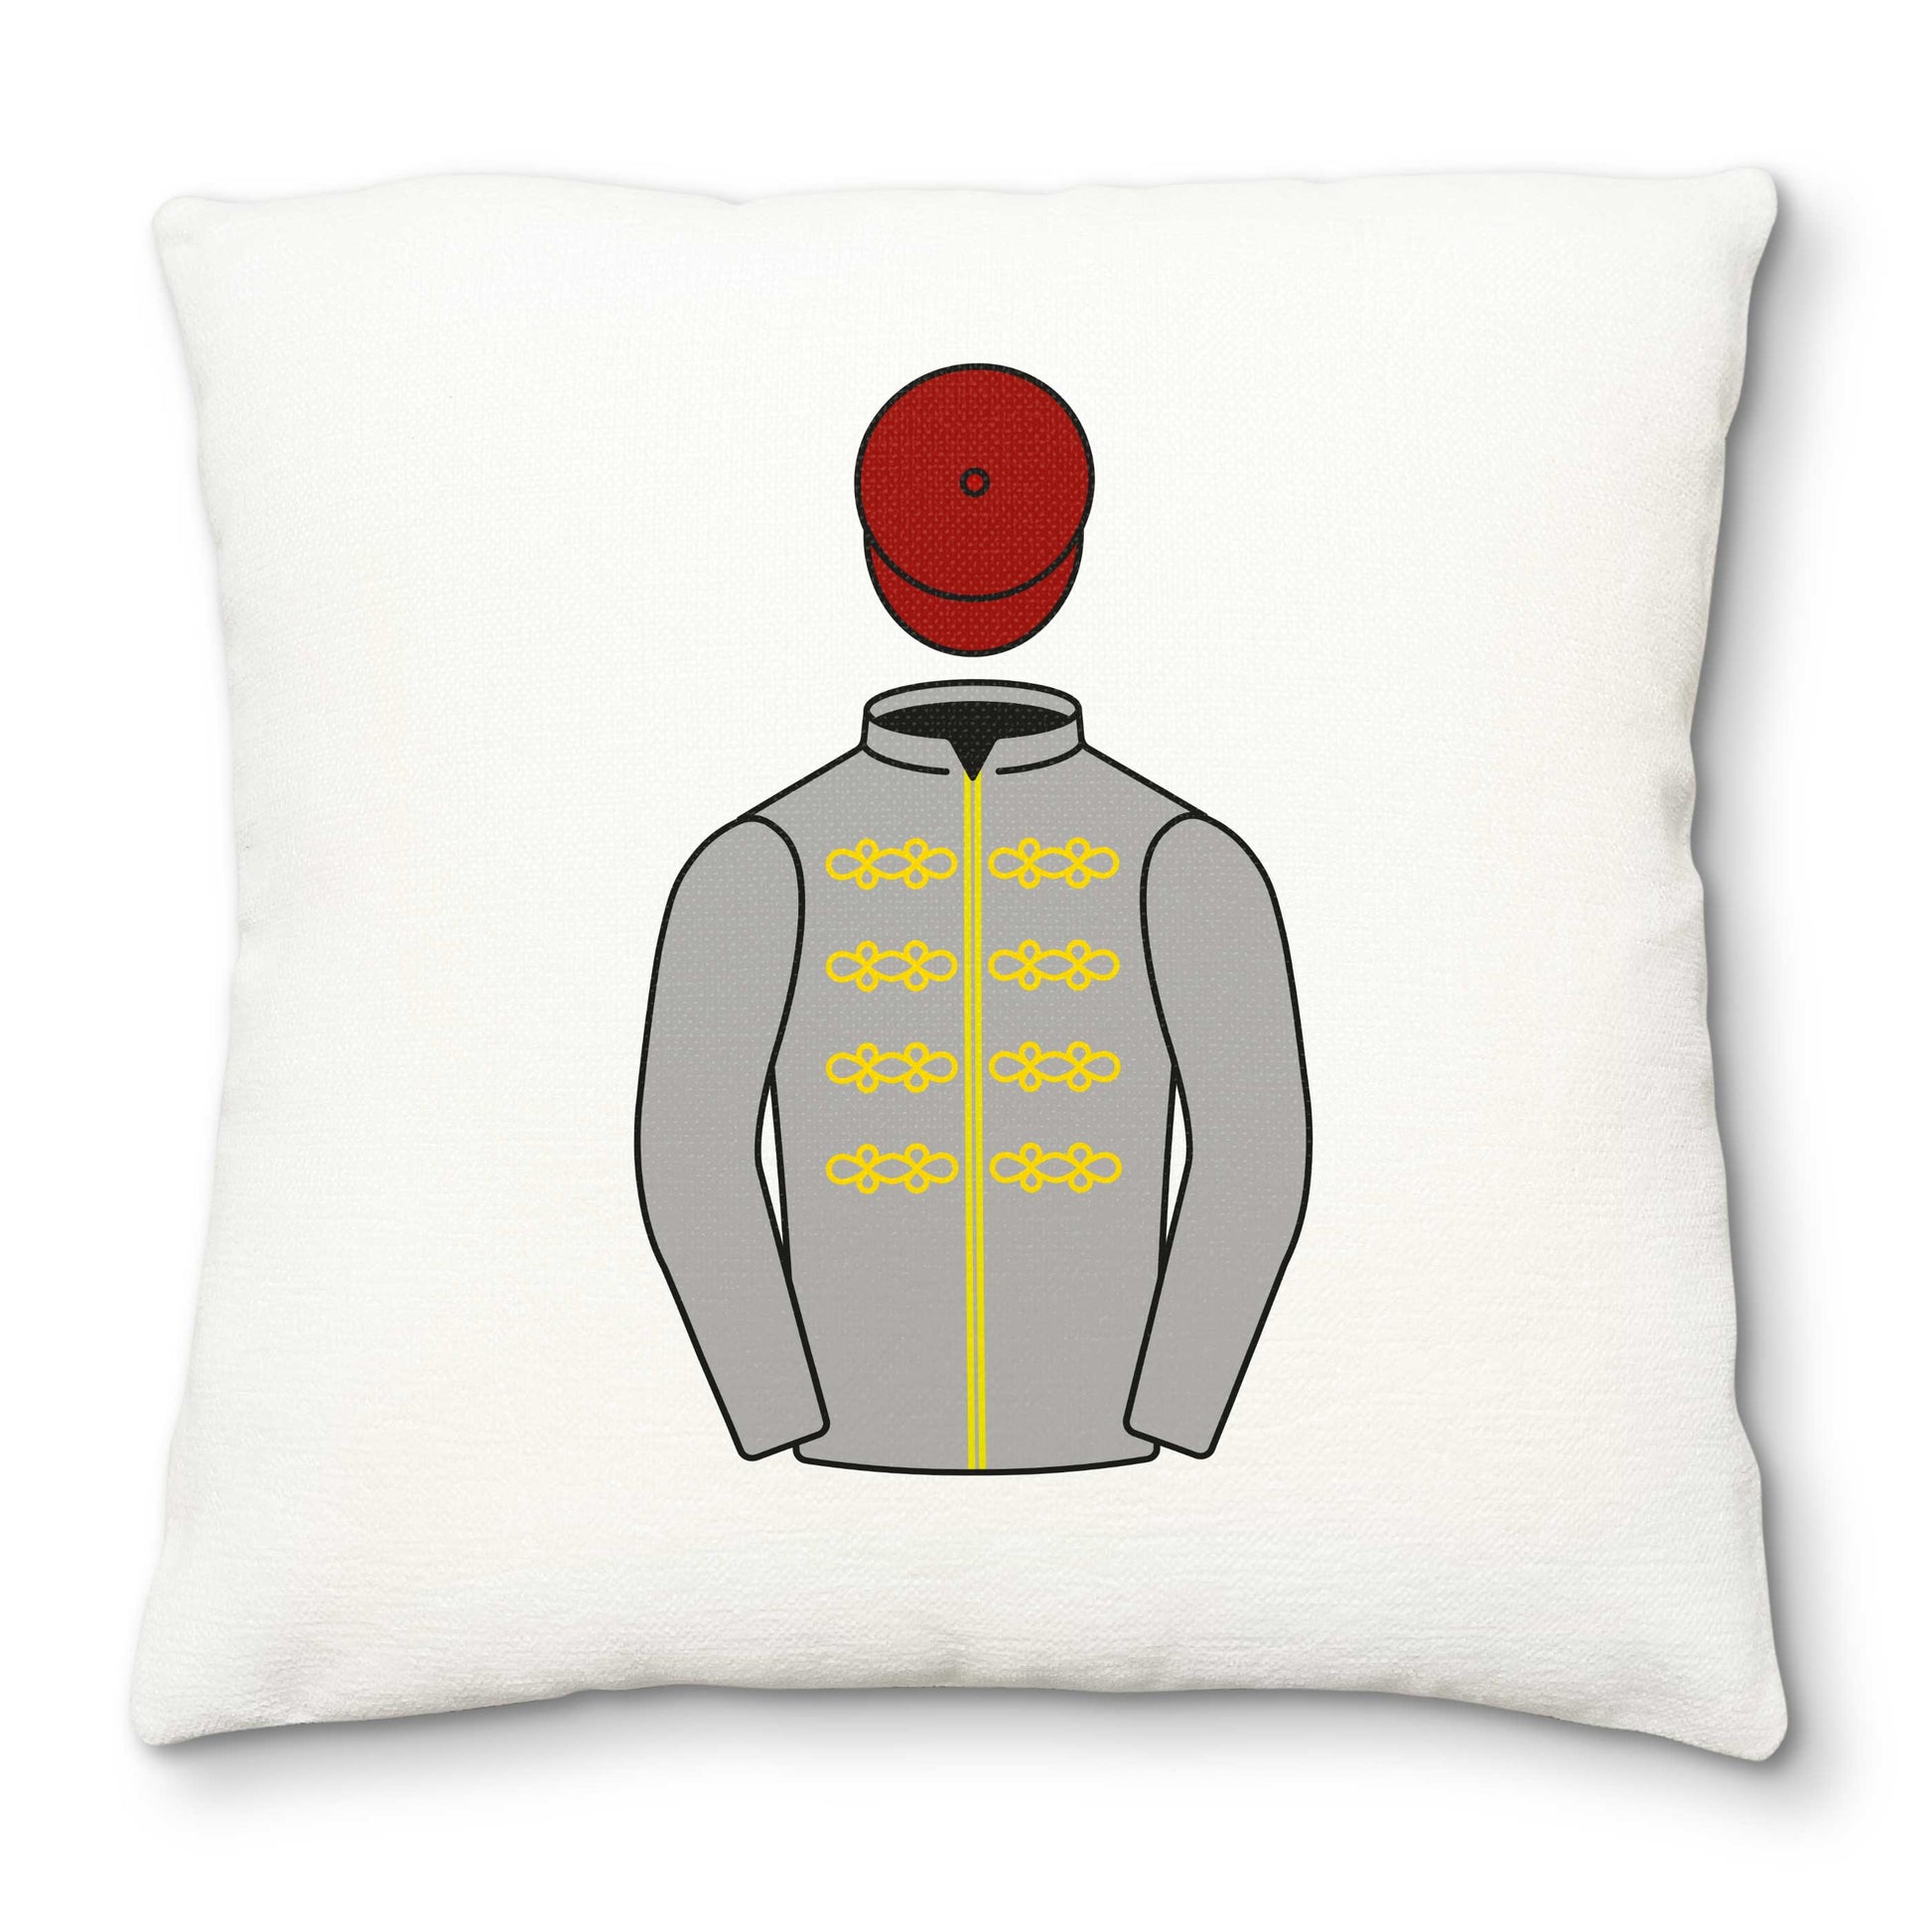 Al Shaqab Racing Deluxe Cushion Cover - Hacked Up